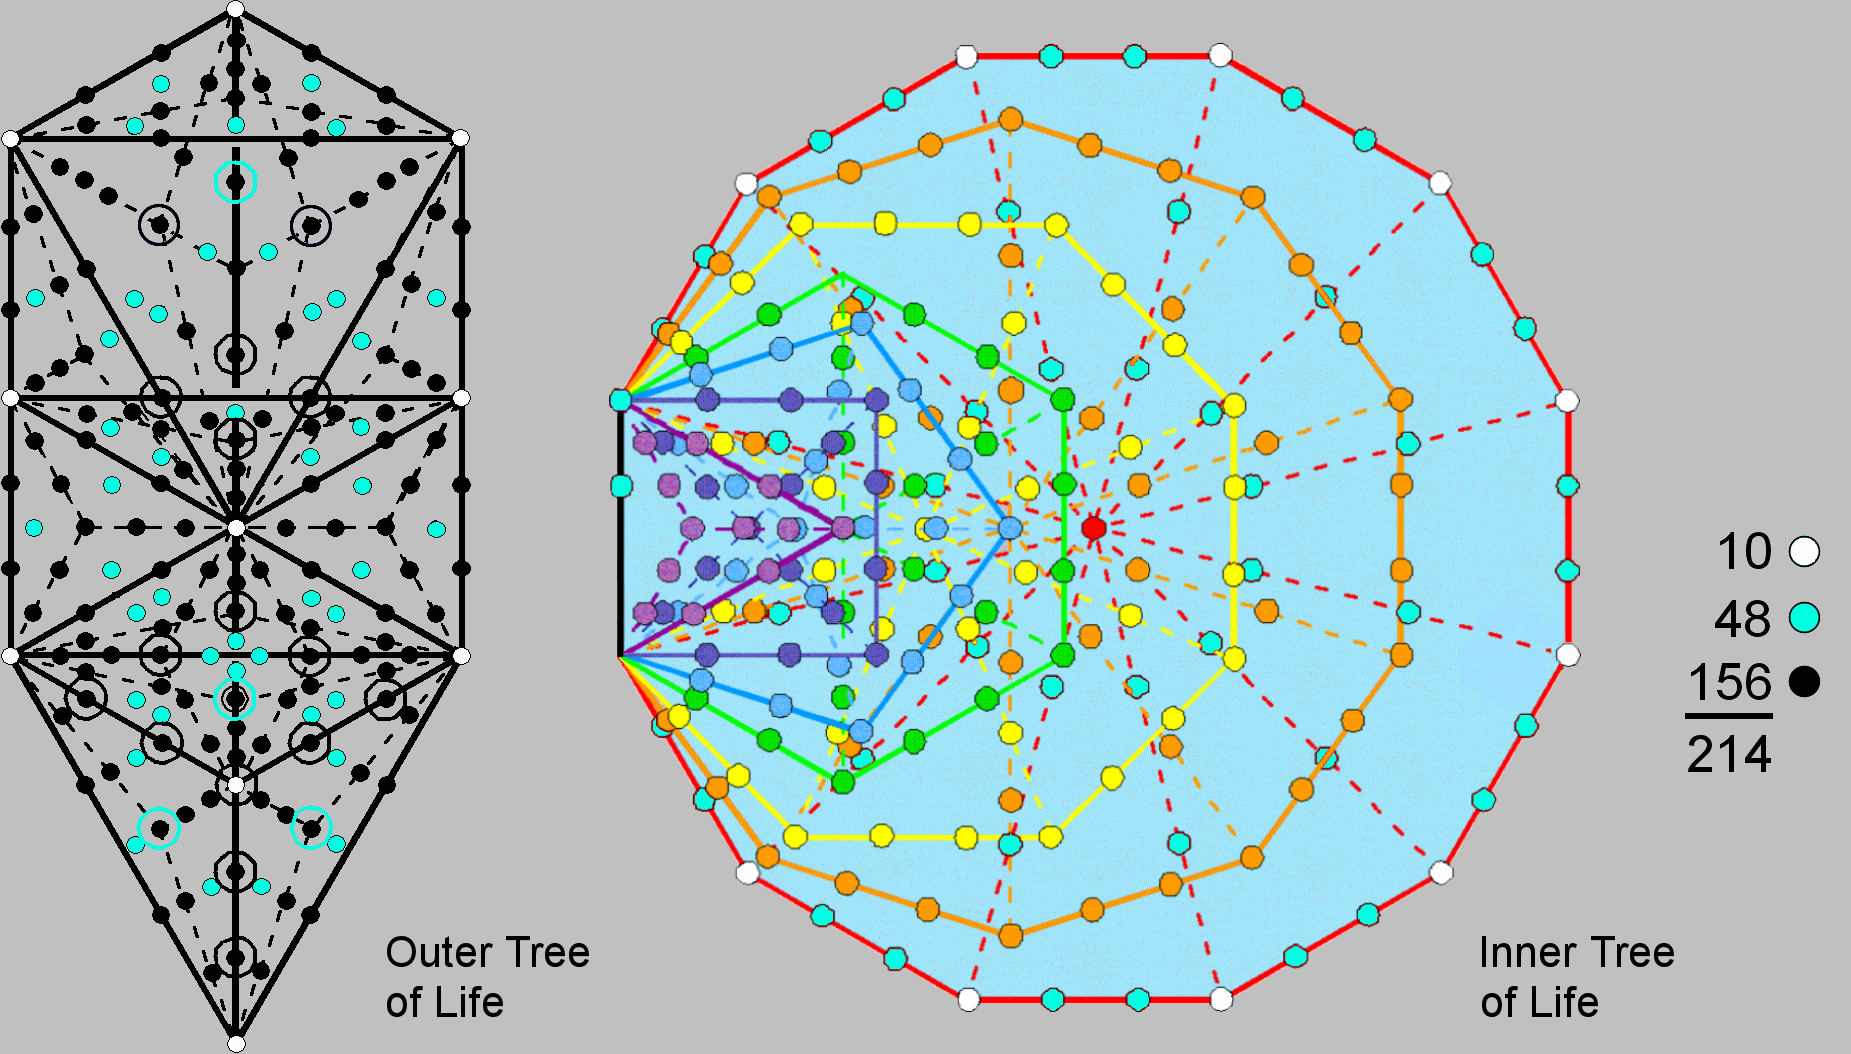 214 embodied in Tree of Life and 7 enfolded polygons